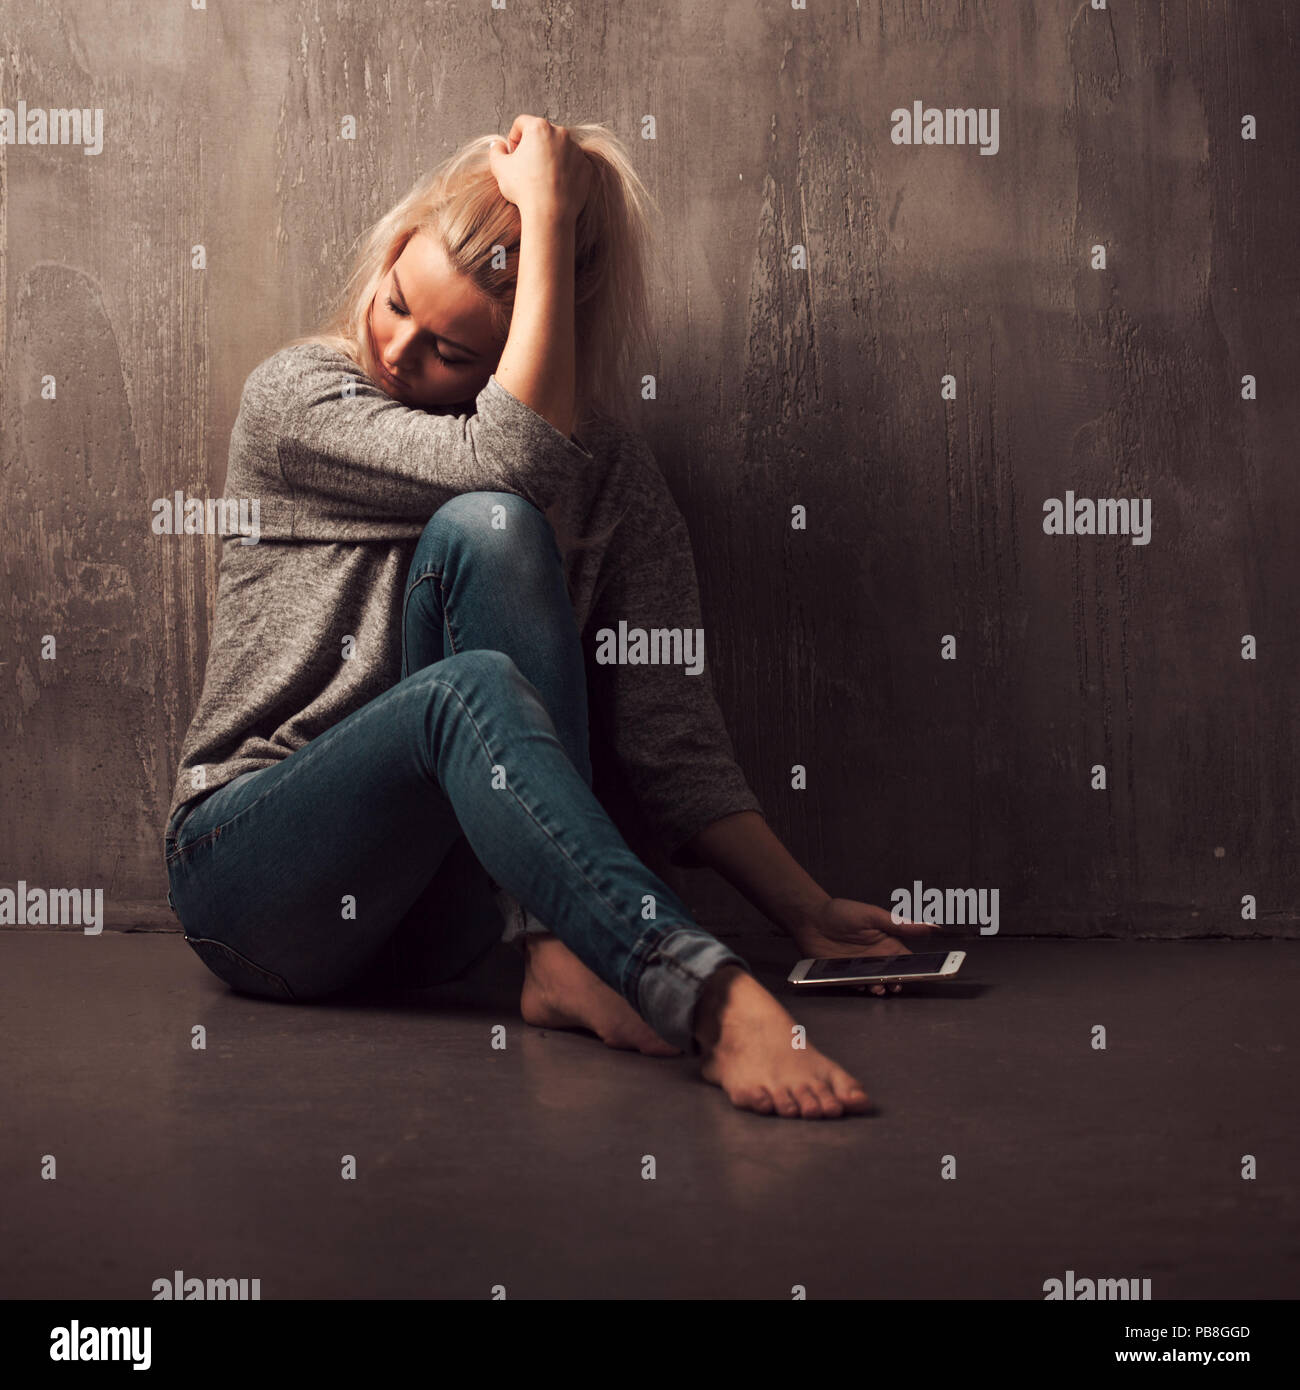 Helpline, psychological assistance. Suffering young woman sitting in a corner with a phone in her hand. mental health, grey background Stock Photo